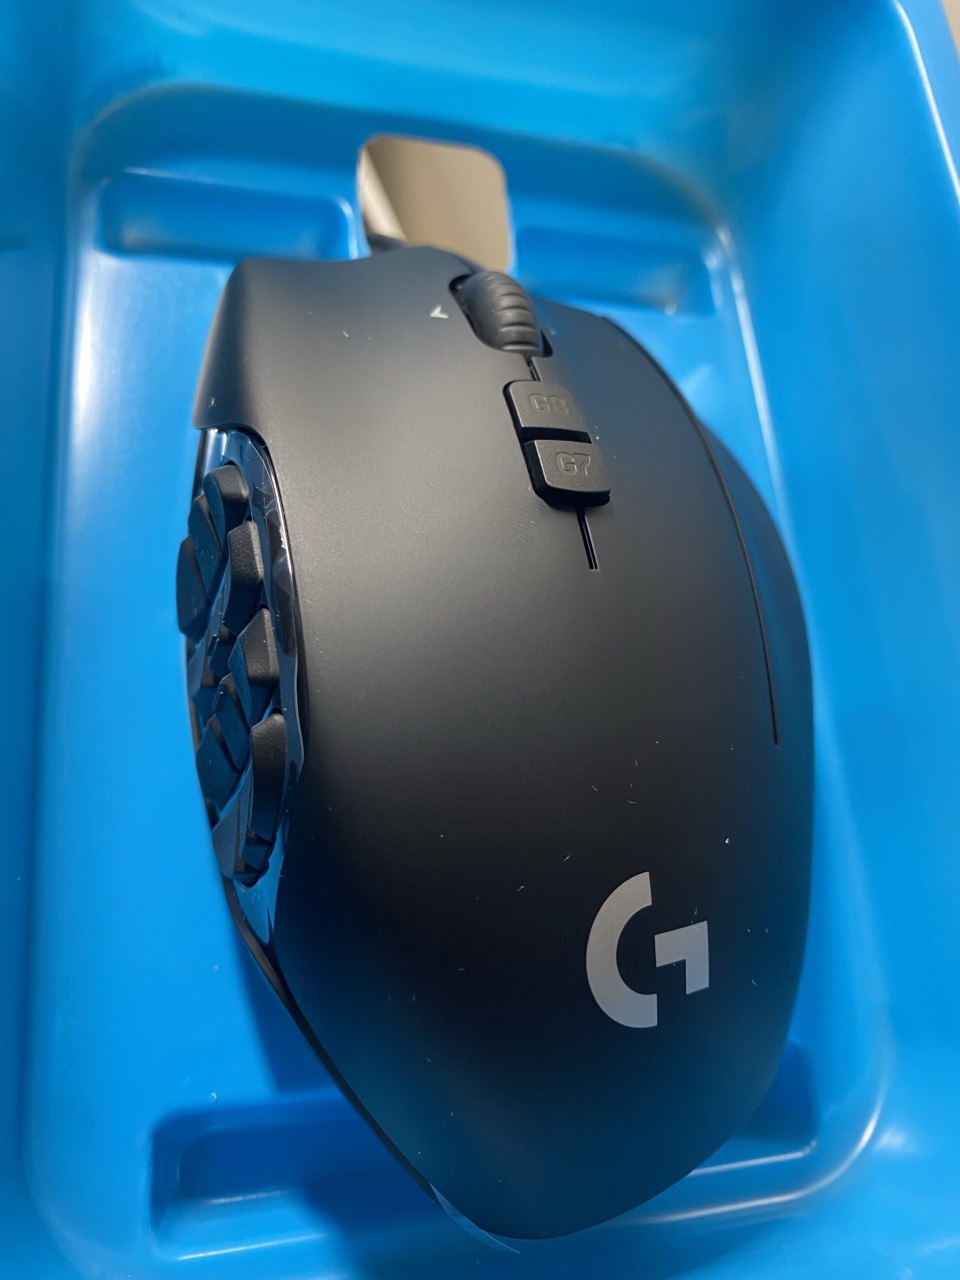 Pros and Cons of the Logitech G600 MMO Gaming Mouse details 1